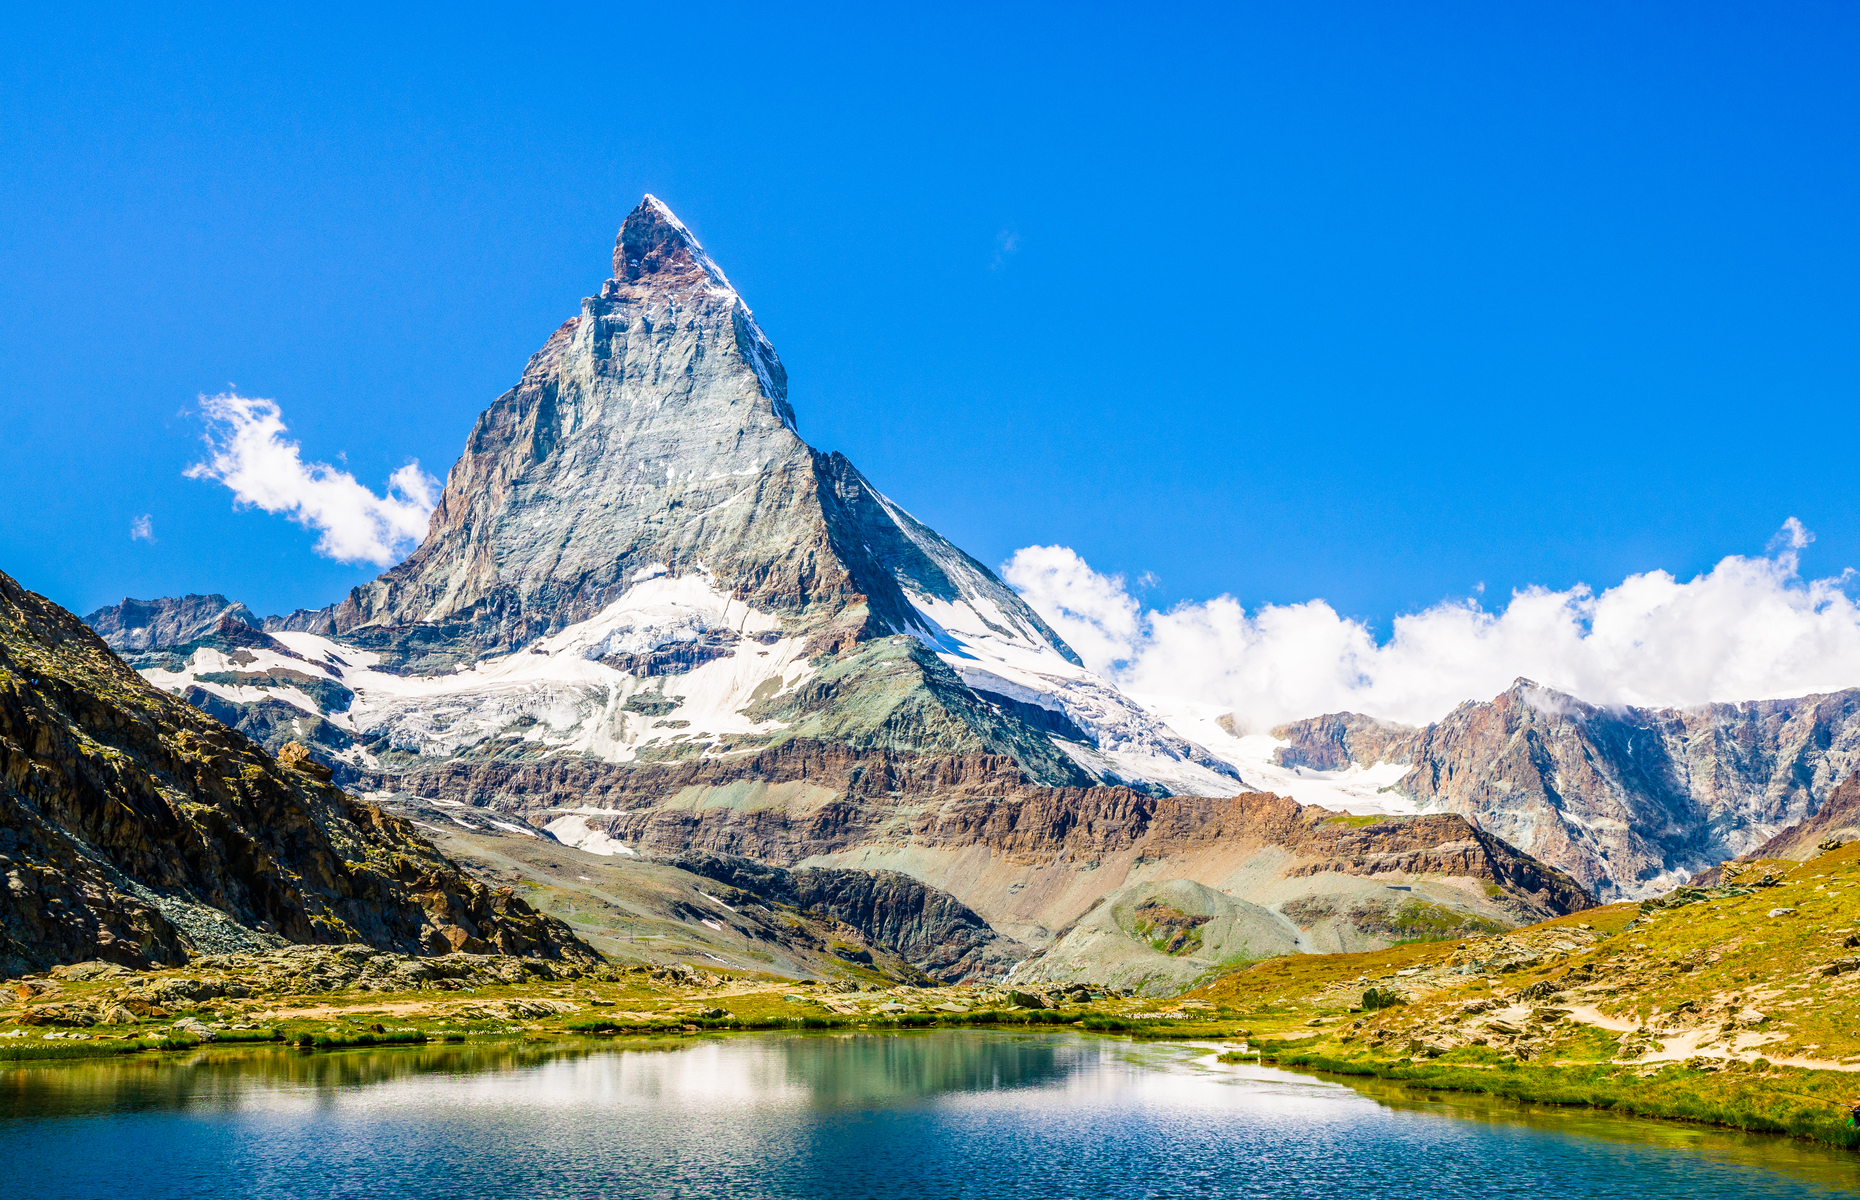 <p>It’s not the tallest mountain in the Alps (that would be Mont Blanc along the France–Italy border), but the Matterhorn, with its unmistakable pyramid-shaped peak, is undoubtedly the most famous. The Matterhorn was formed some <a href="https://www.beautifulworld.com/europe/switzerland/matterhorn/" rel="noreferrer noopener">50 to 60 million years ago</a> when the African and Eurasian tectonic plates collided, forcing up the ground below.</p>